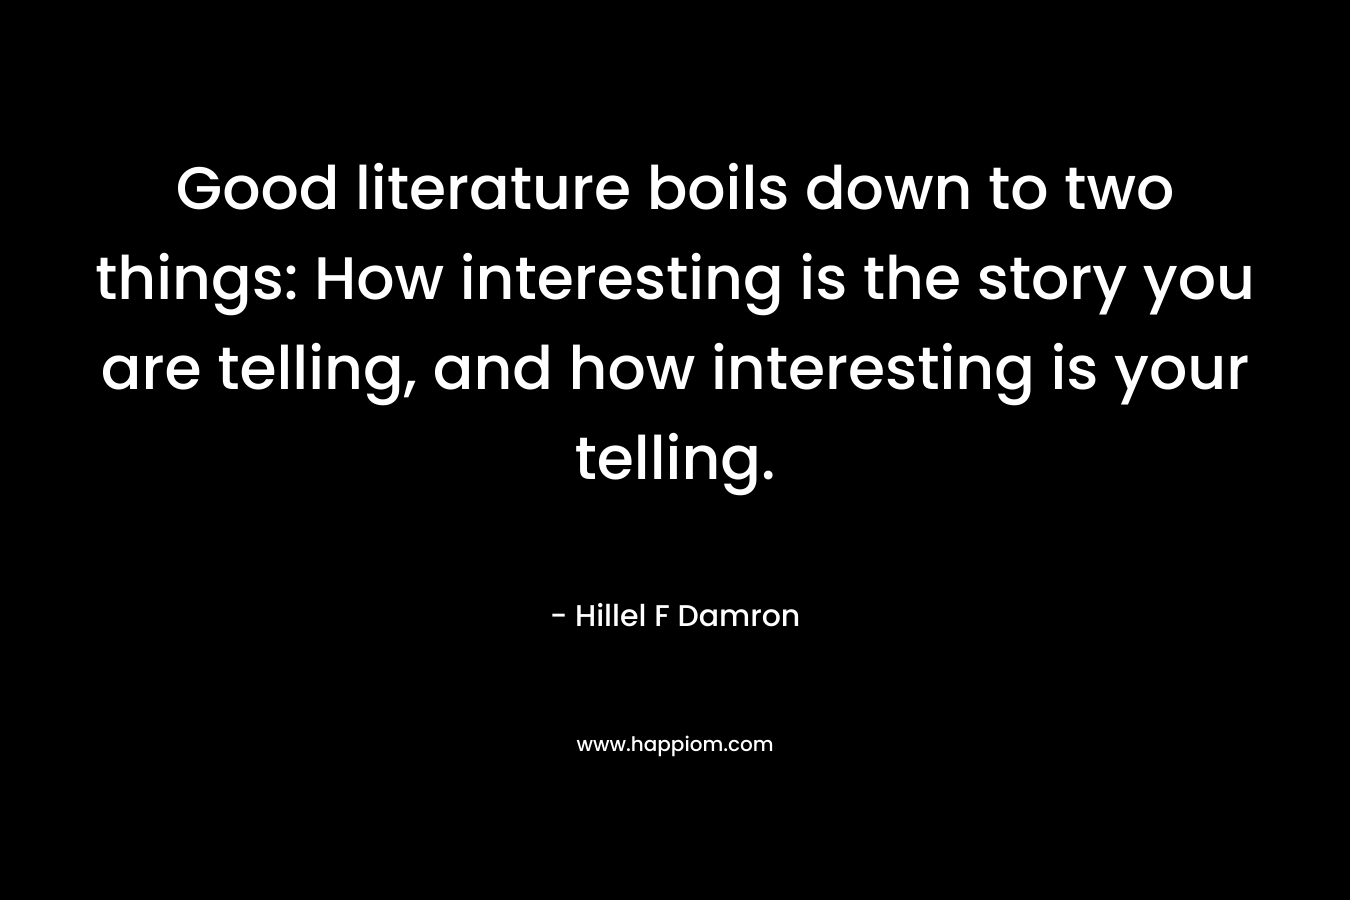 Good literature boils down to two things: How interesting is the story you are telling, and how interesting is your telling. – Hillel F Damron